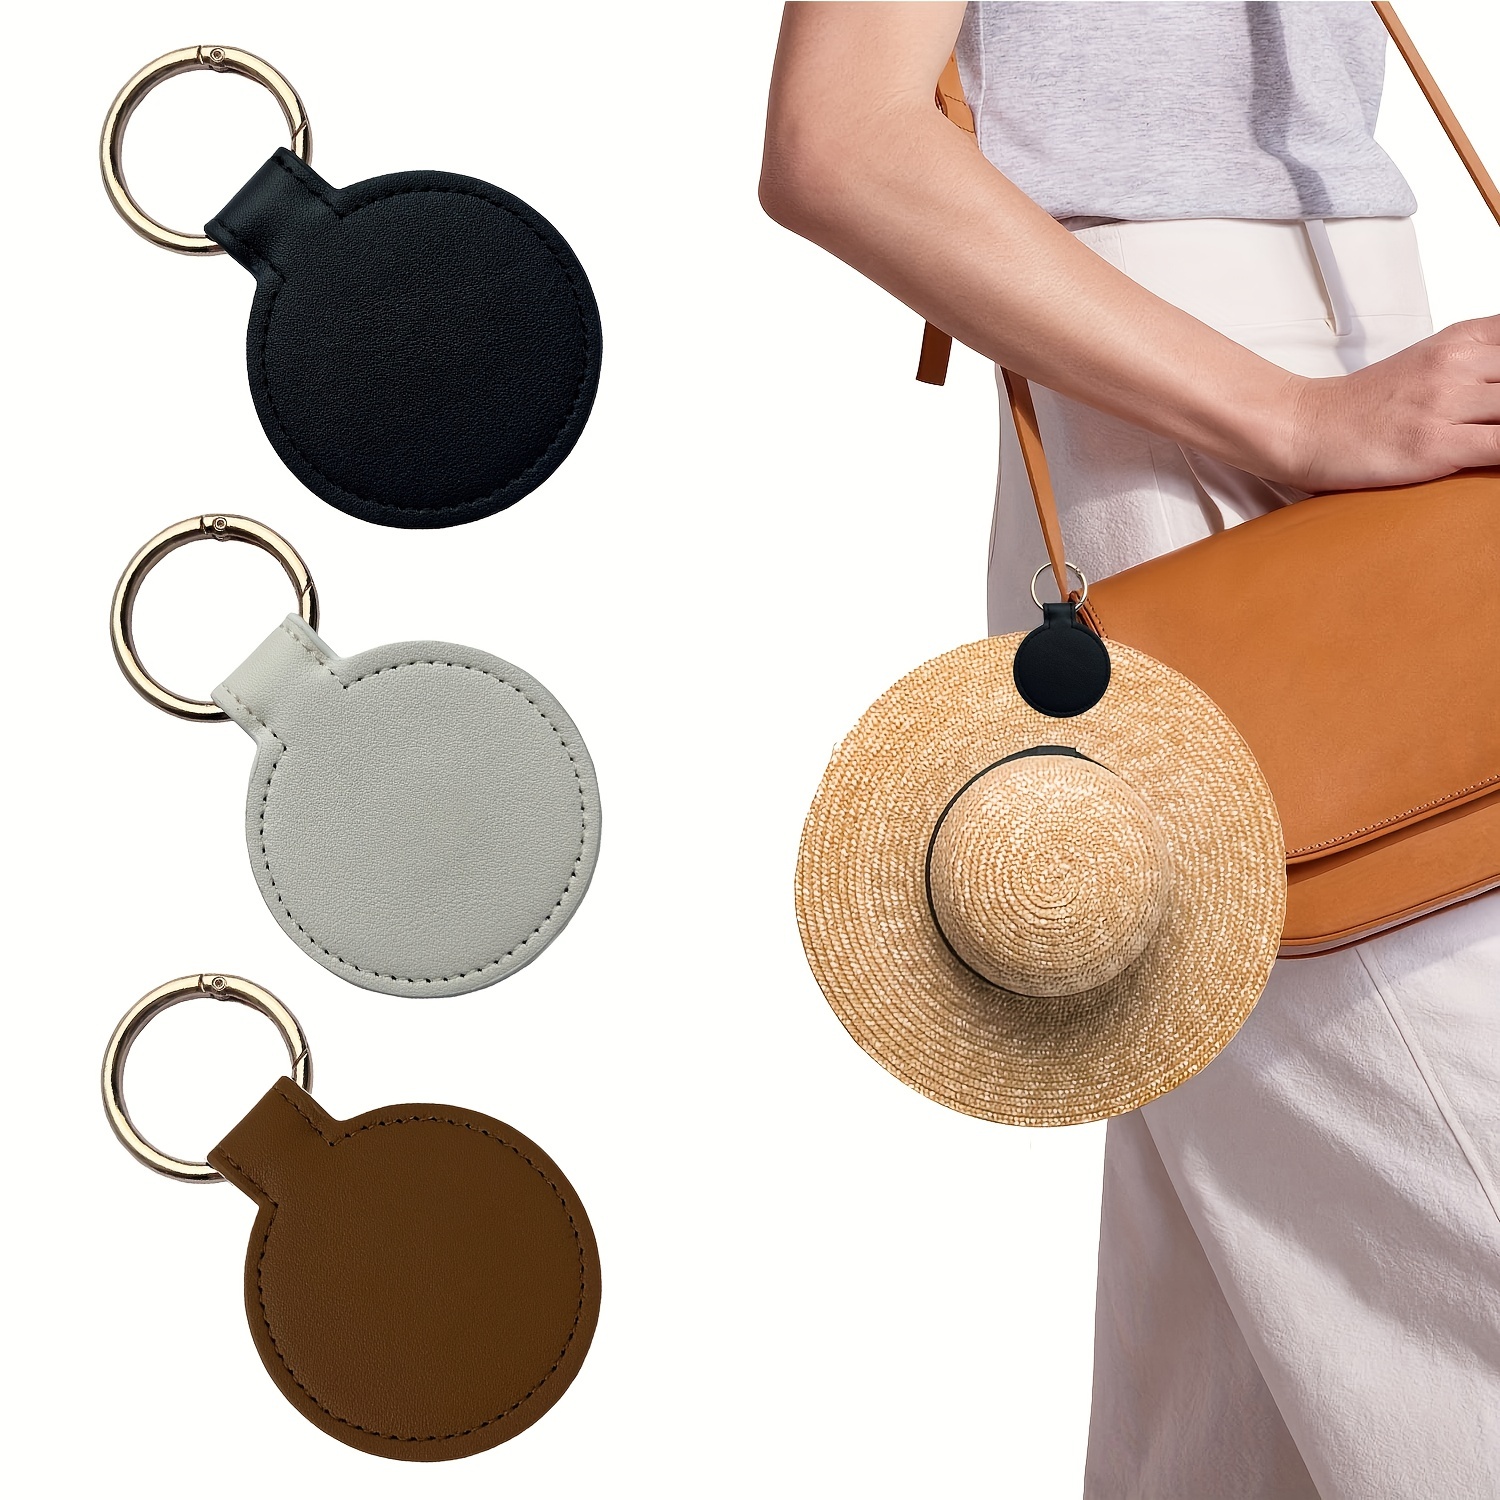 Magnetic Hat Clip For Travel,hat Clips For Luggage,hands Free Bag Accessory  For Bag, Purse, Luggage, And Backpack